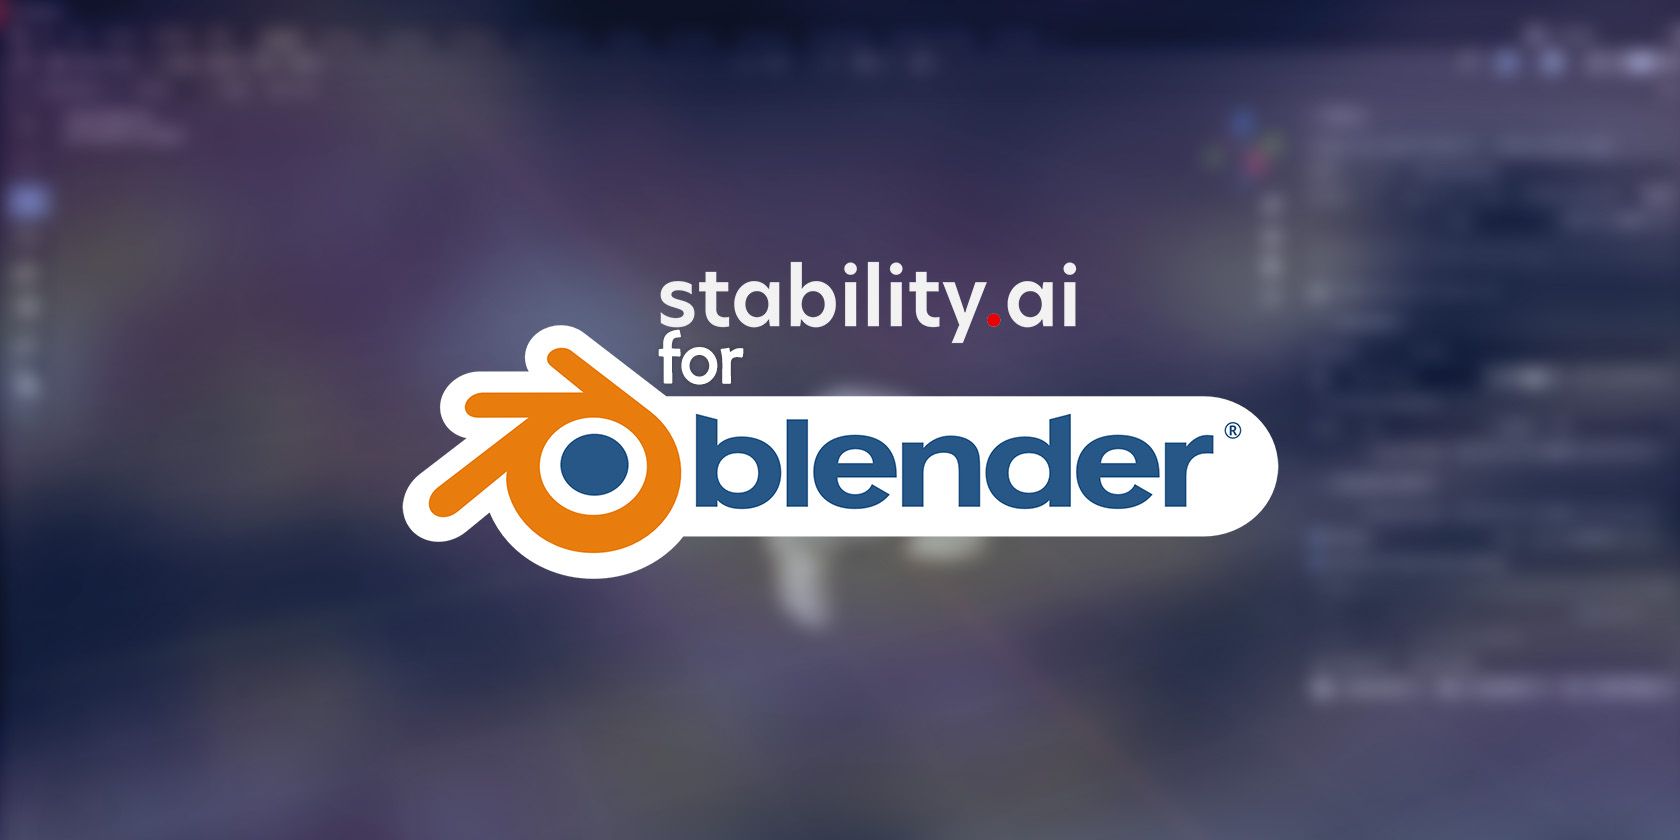 Stability and Blender logos on a background